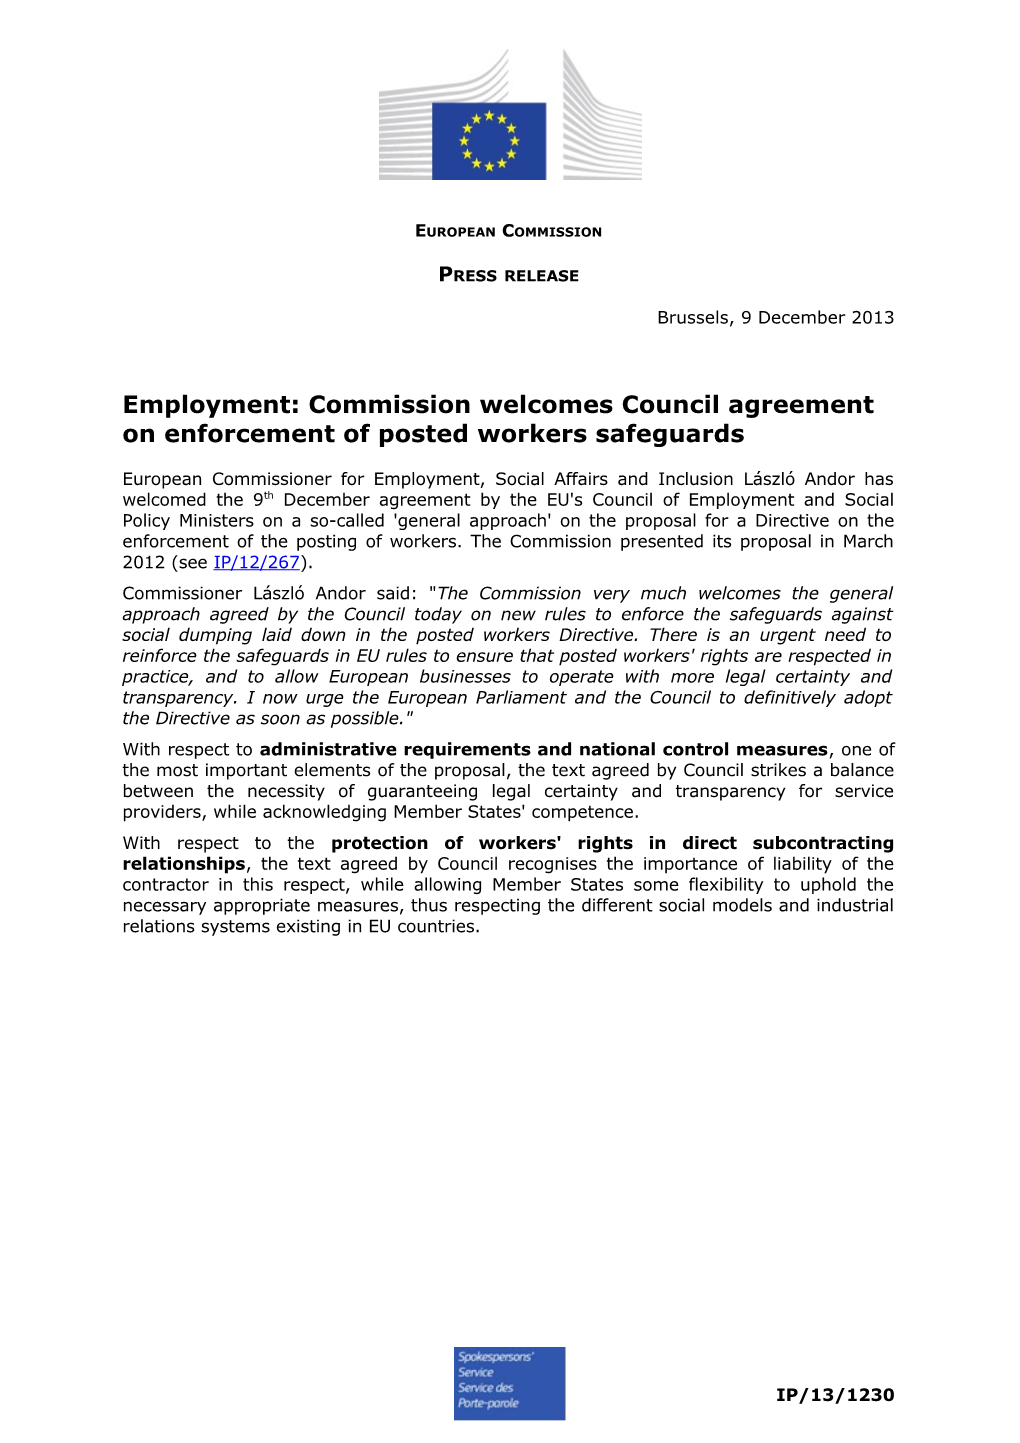 Employment: Commission Welcomes Council Agreement on Enforcement of Posted Workers Safeguards